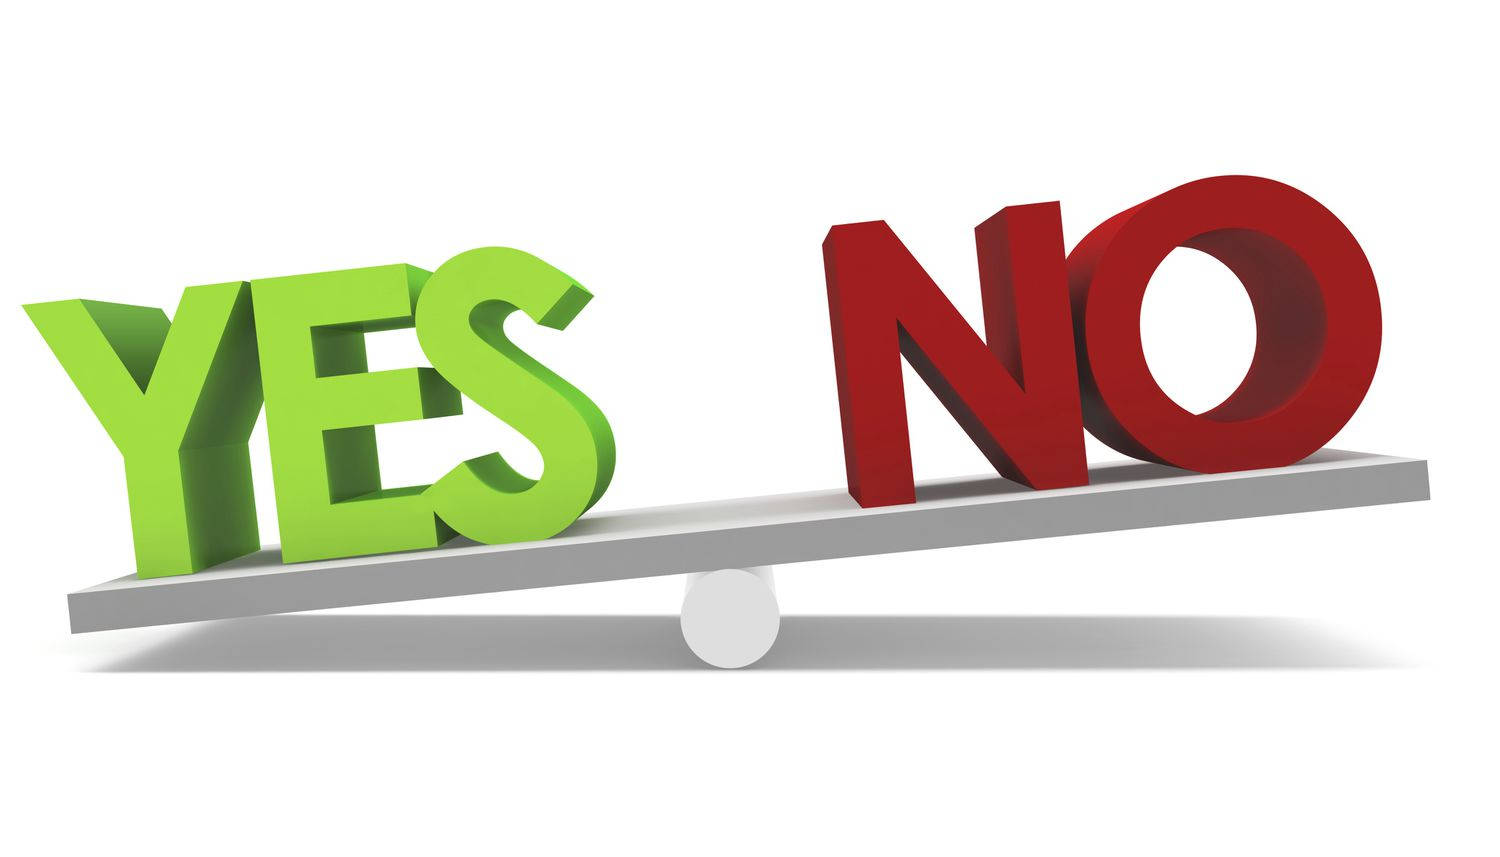 Yes No On Seesaw Wallpaper